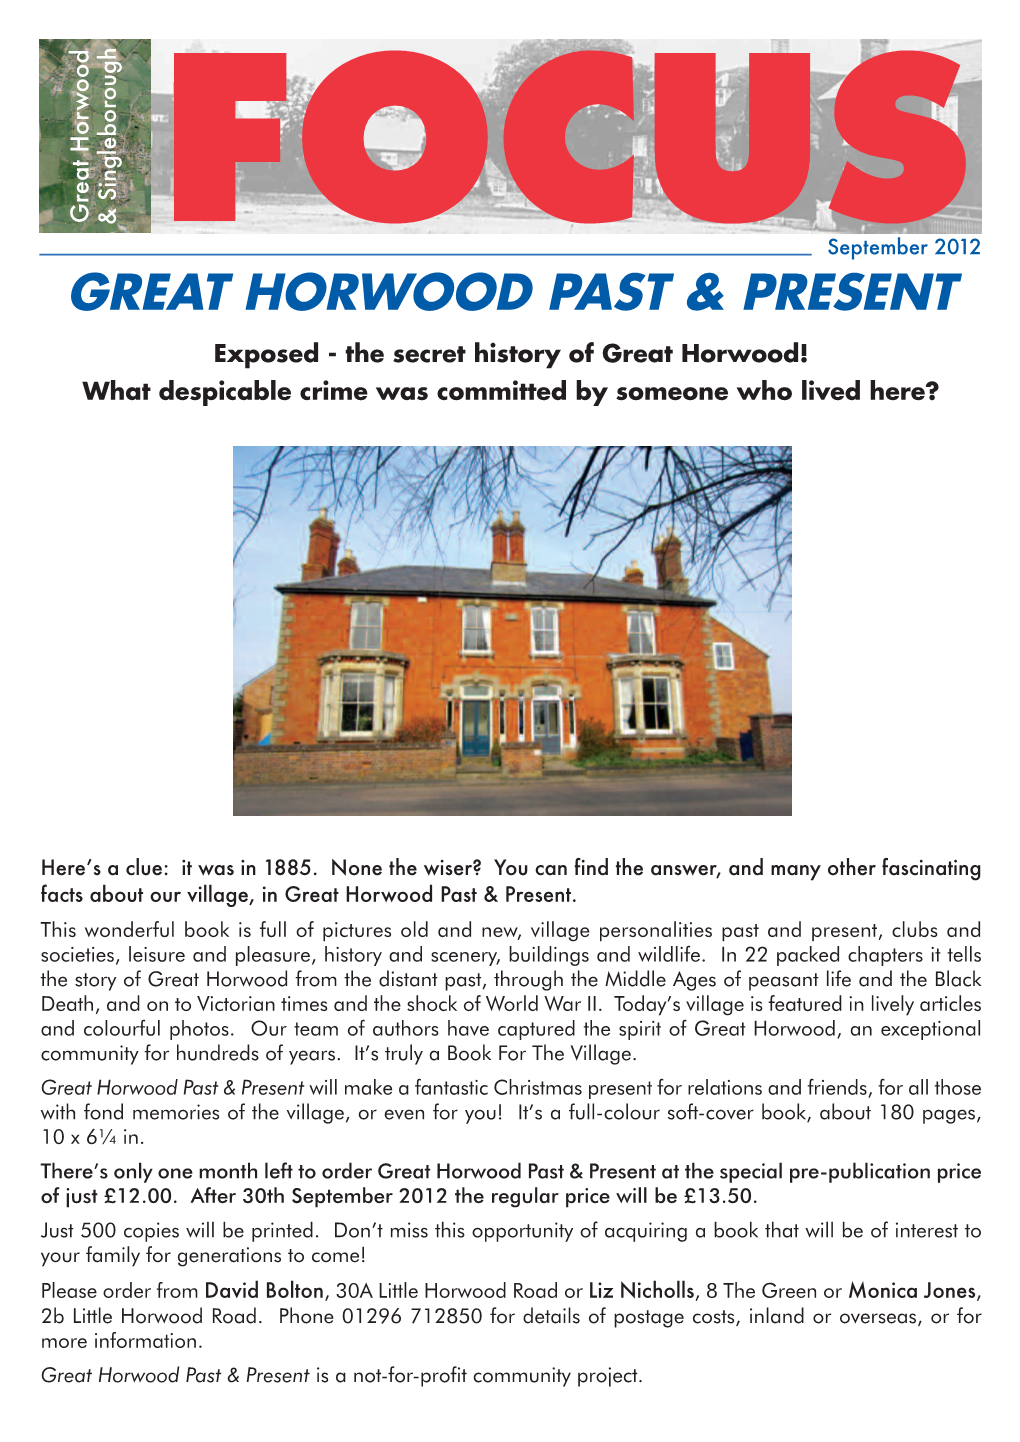 Great Horwood Past & Present